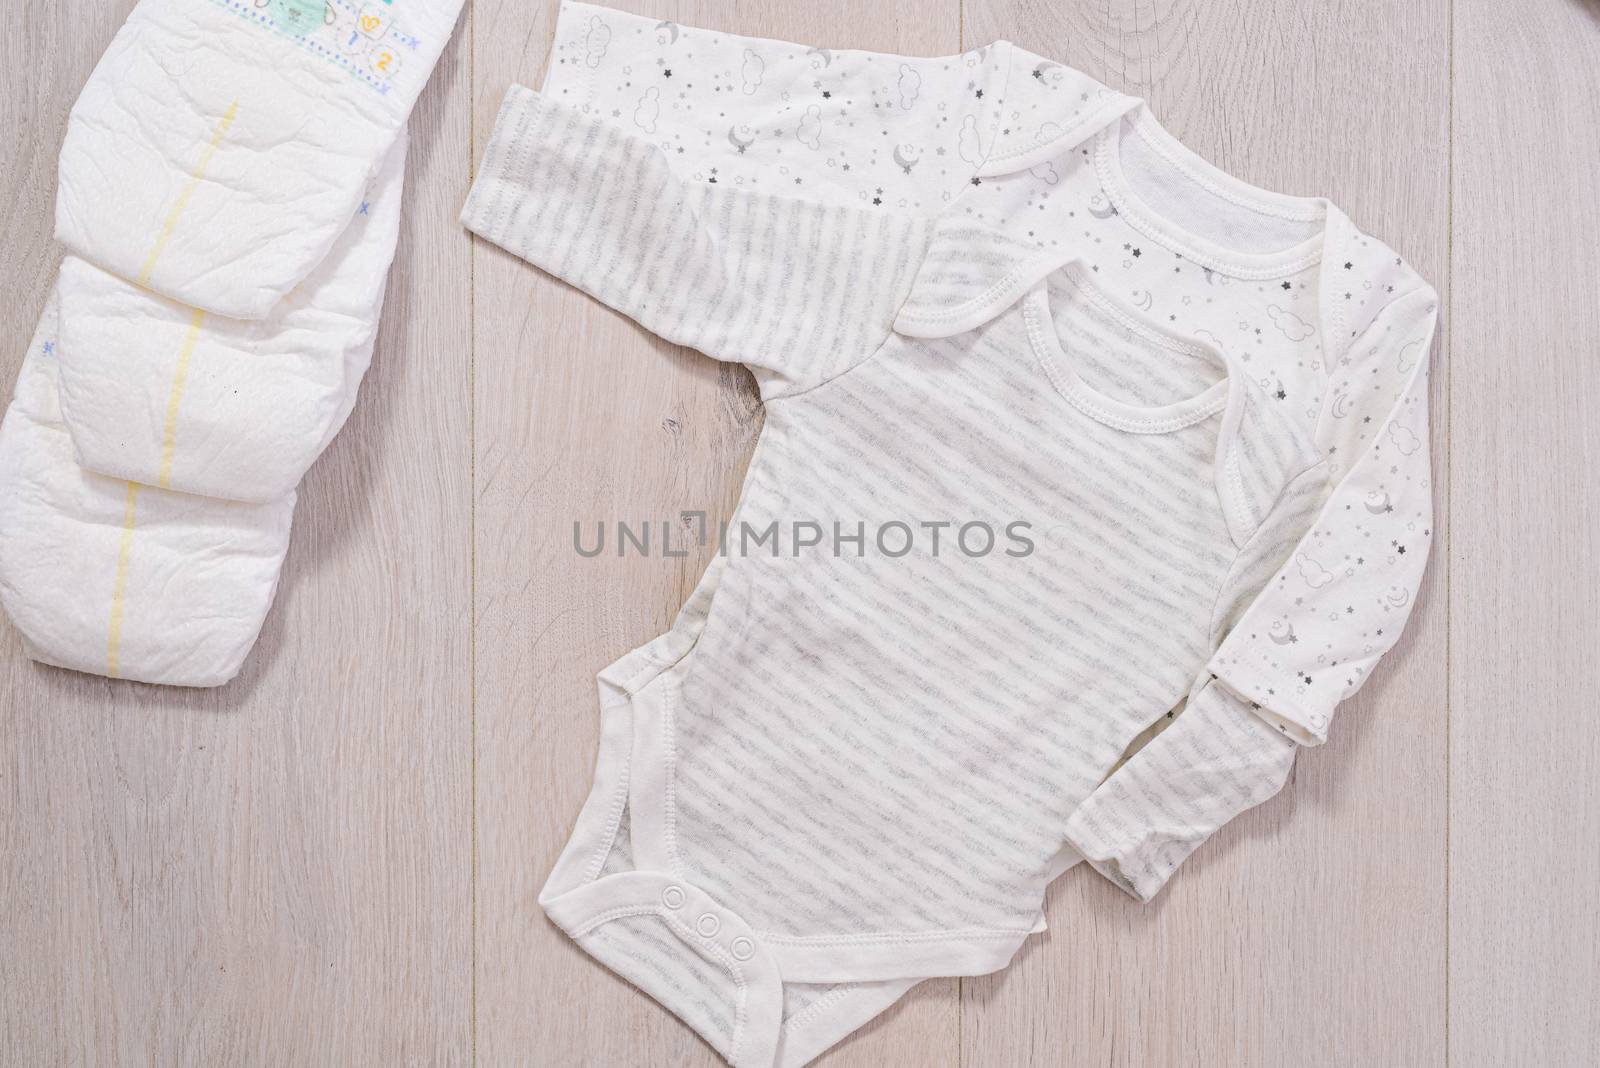 white baby clothes and diapers on wooden background. newborn